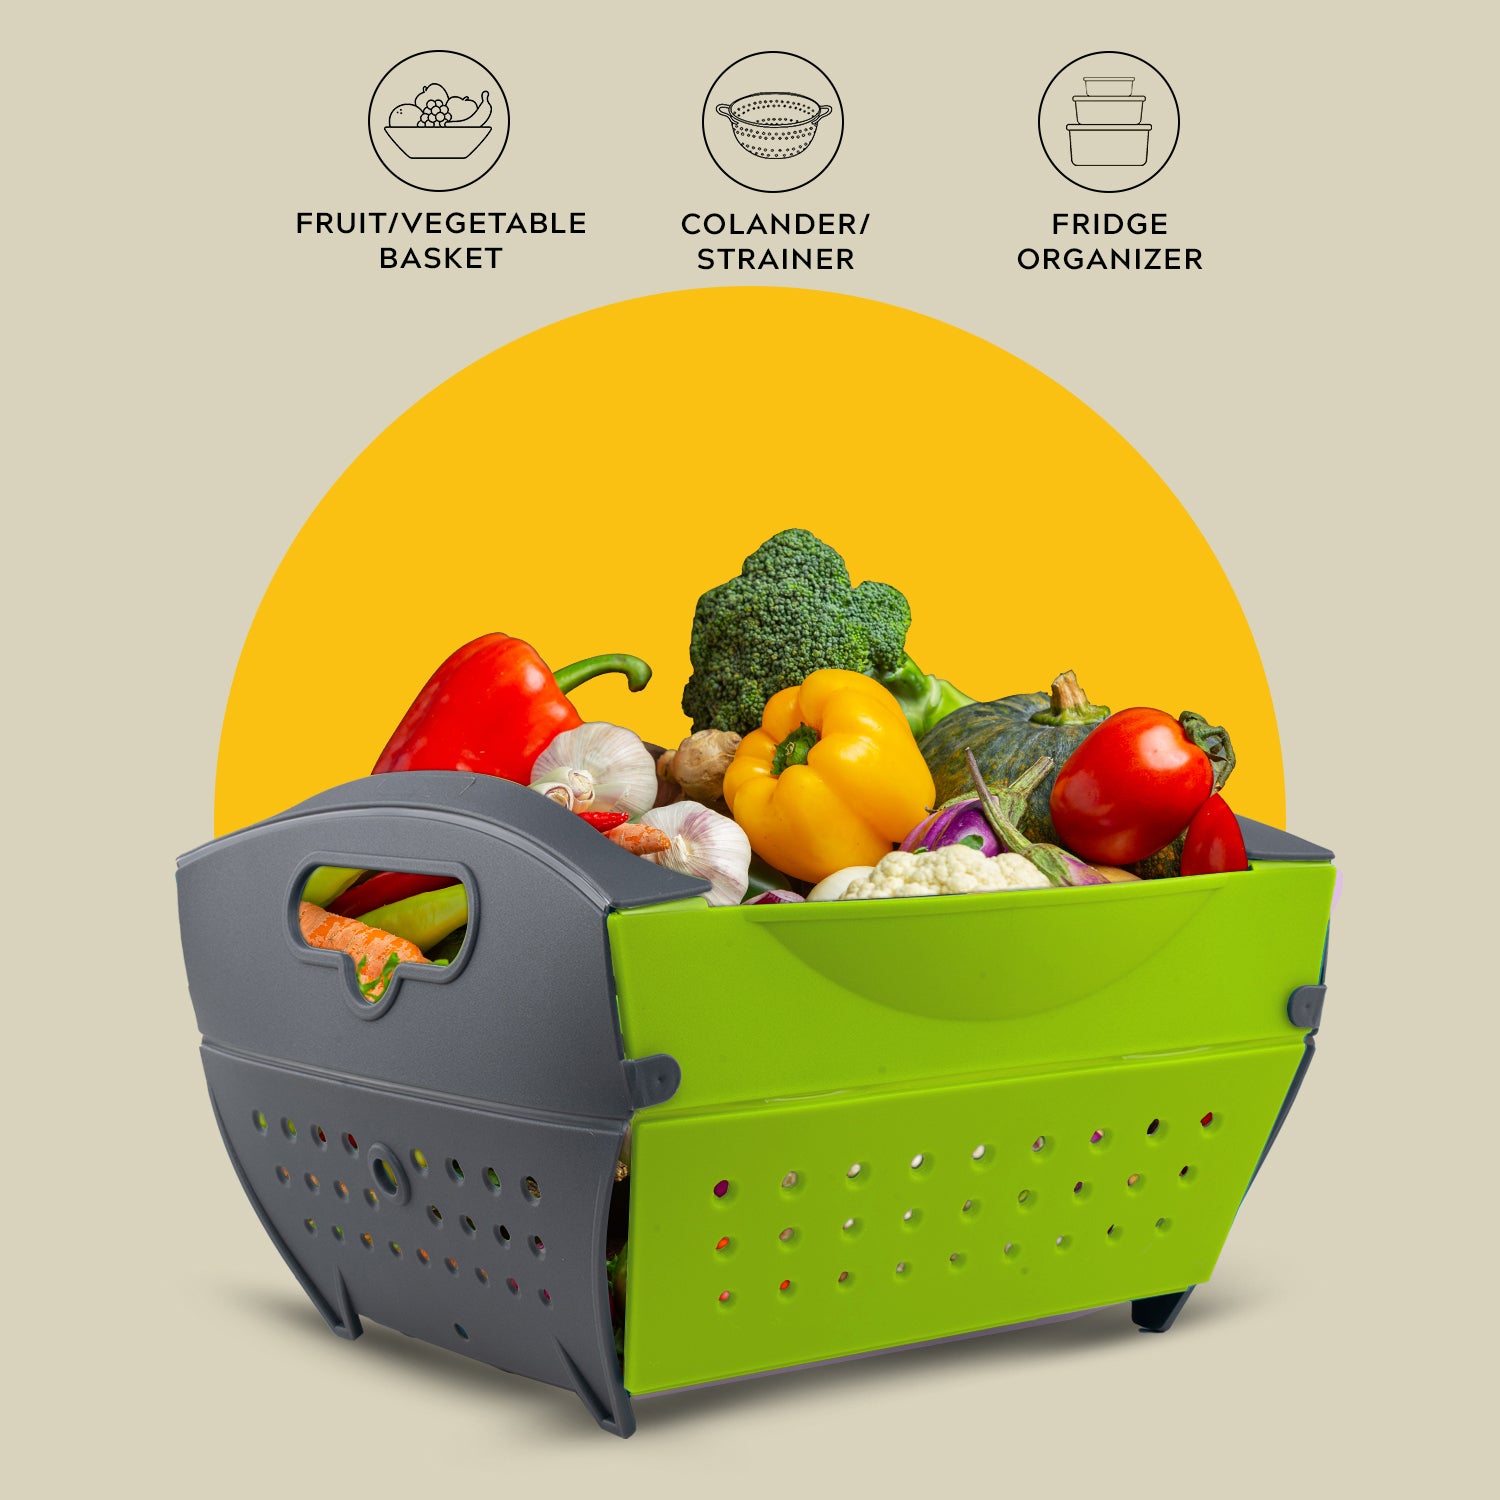 Collapsible Fruits & Vegetable Basket